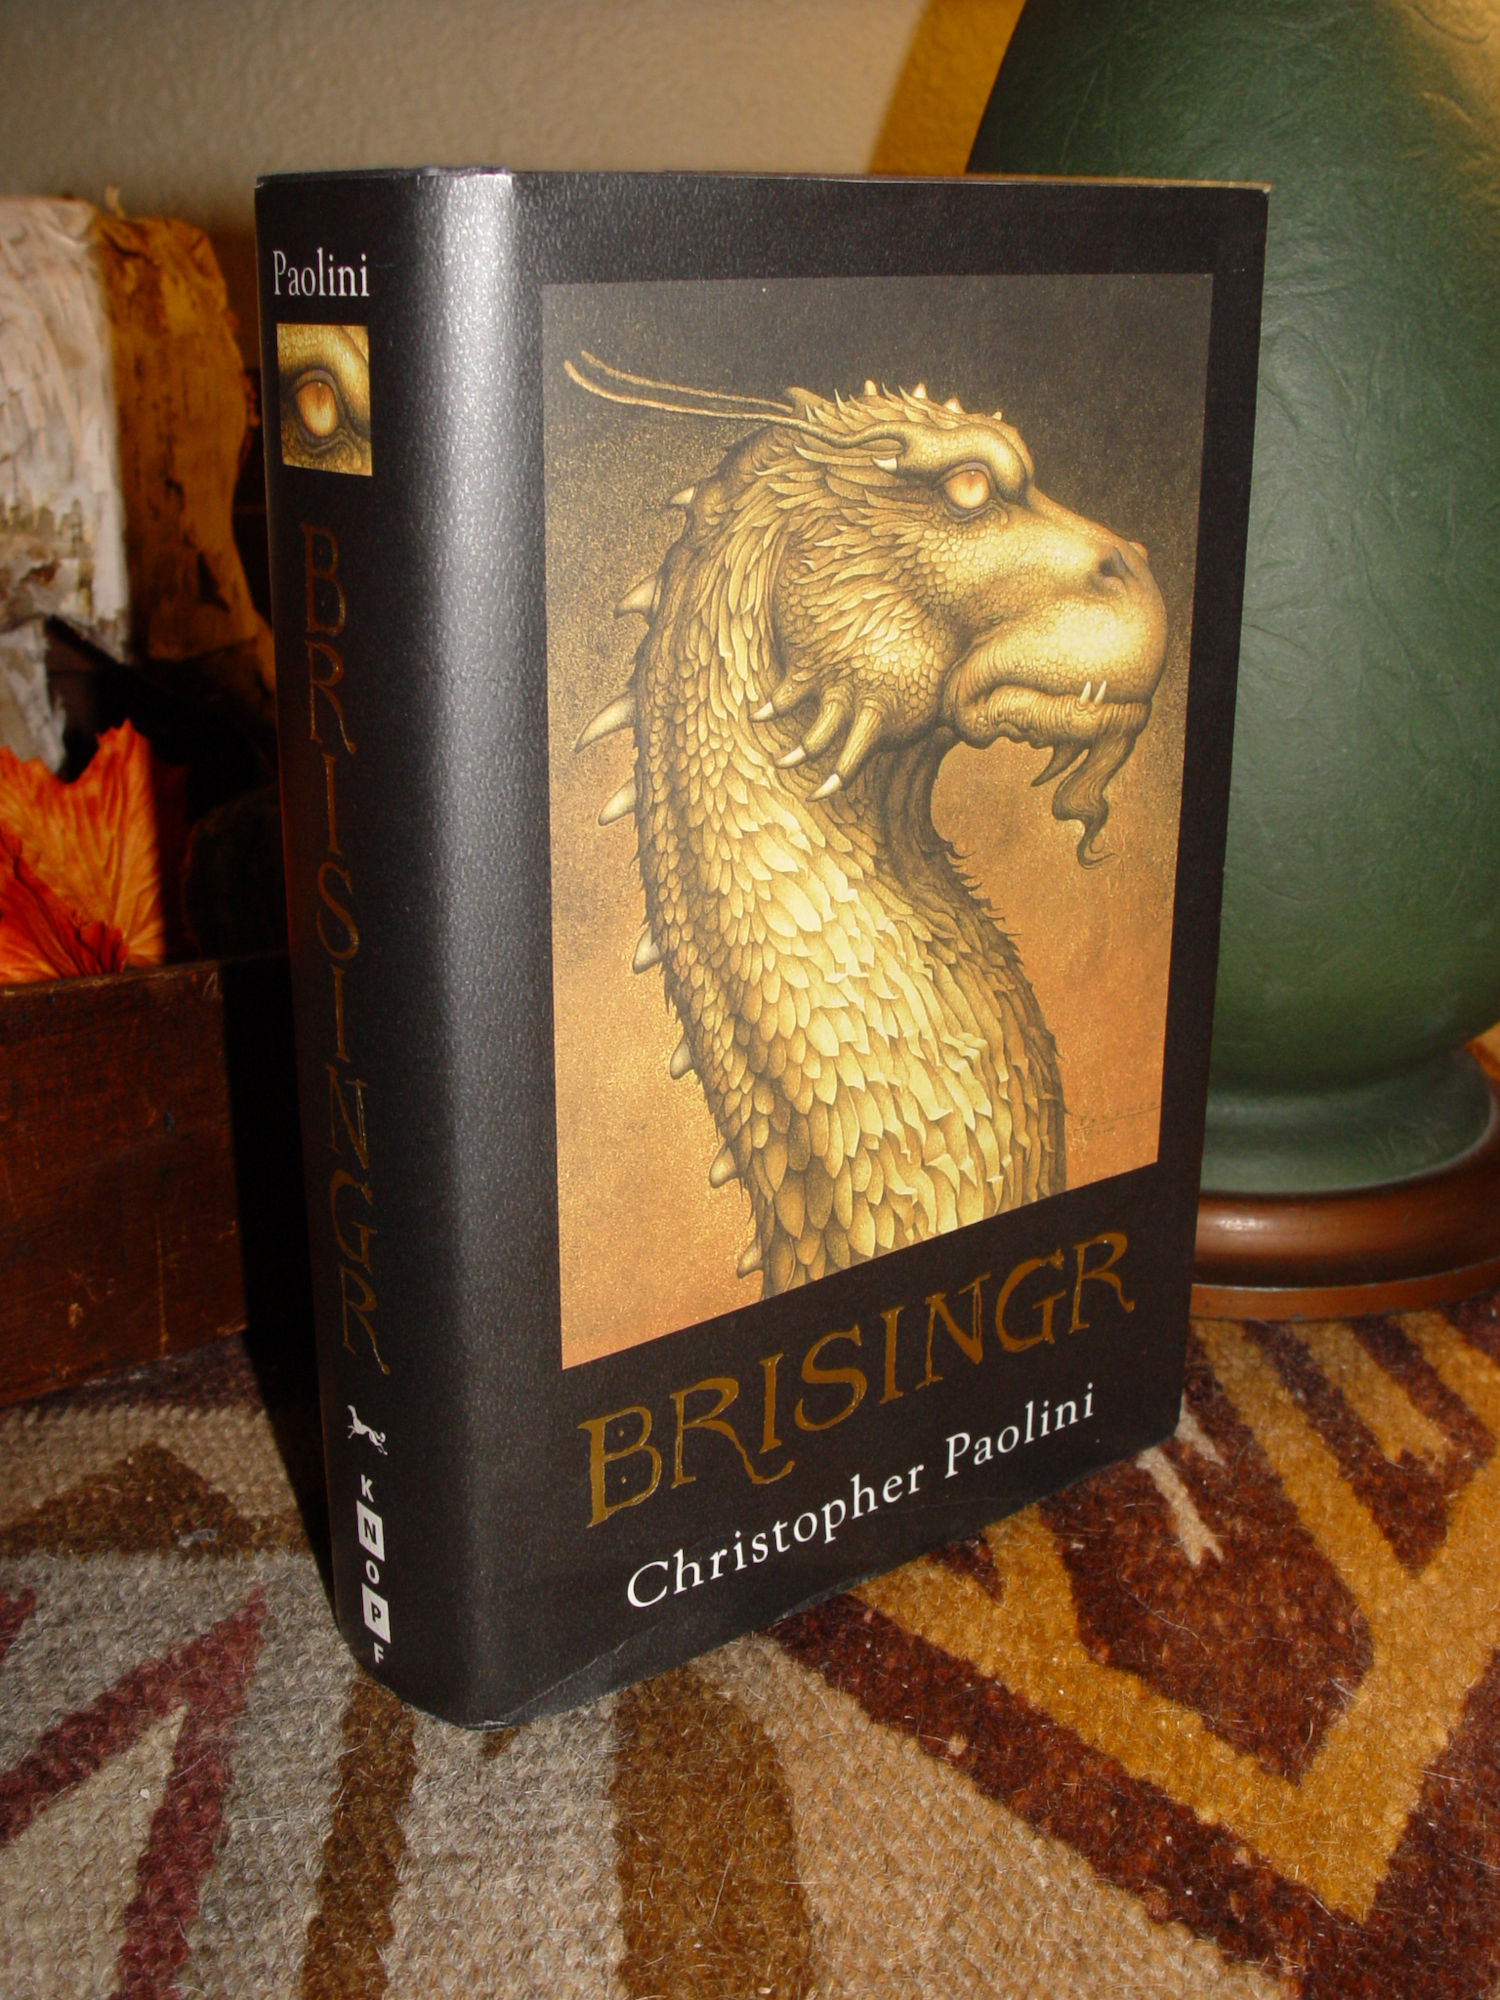 Brisingr 2008 - #3 The Inheritance Cycle
                        Series, by Christopher Paolini